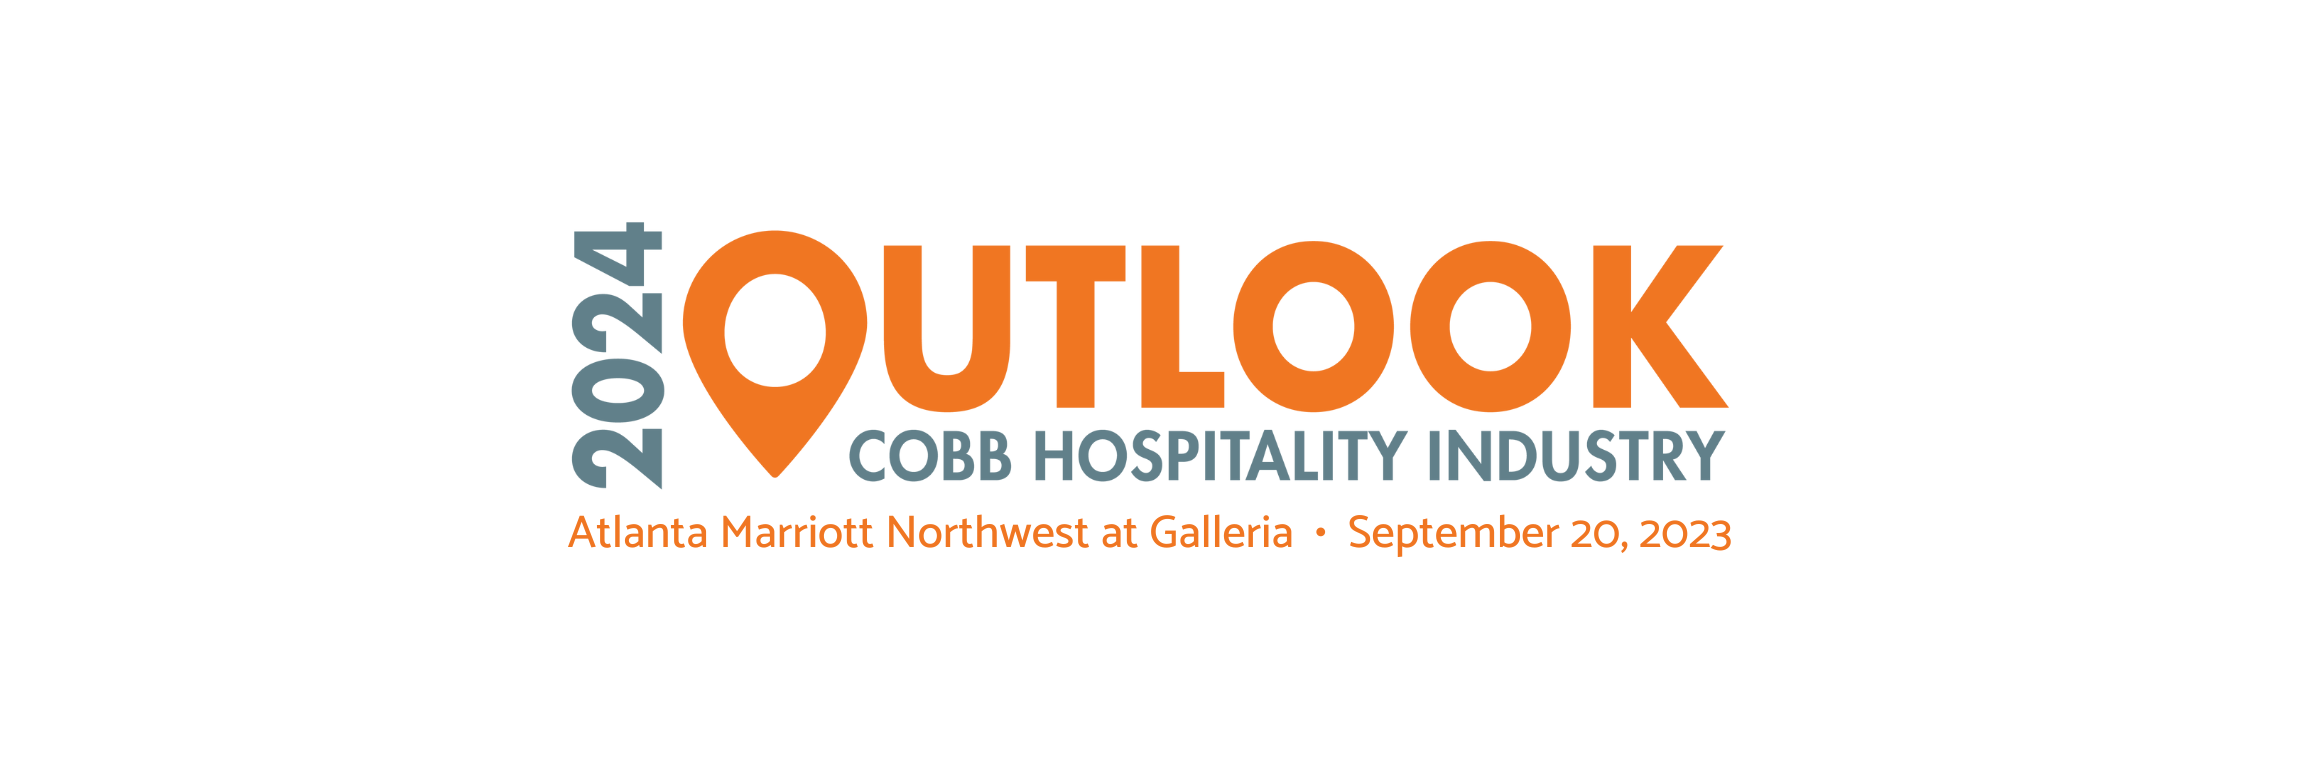 2024 Cobb Hospitality Industry Outlook